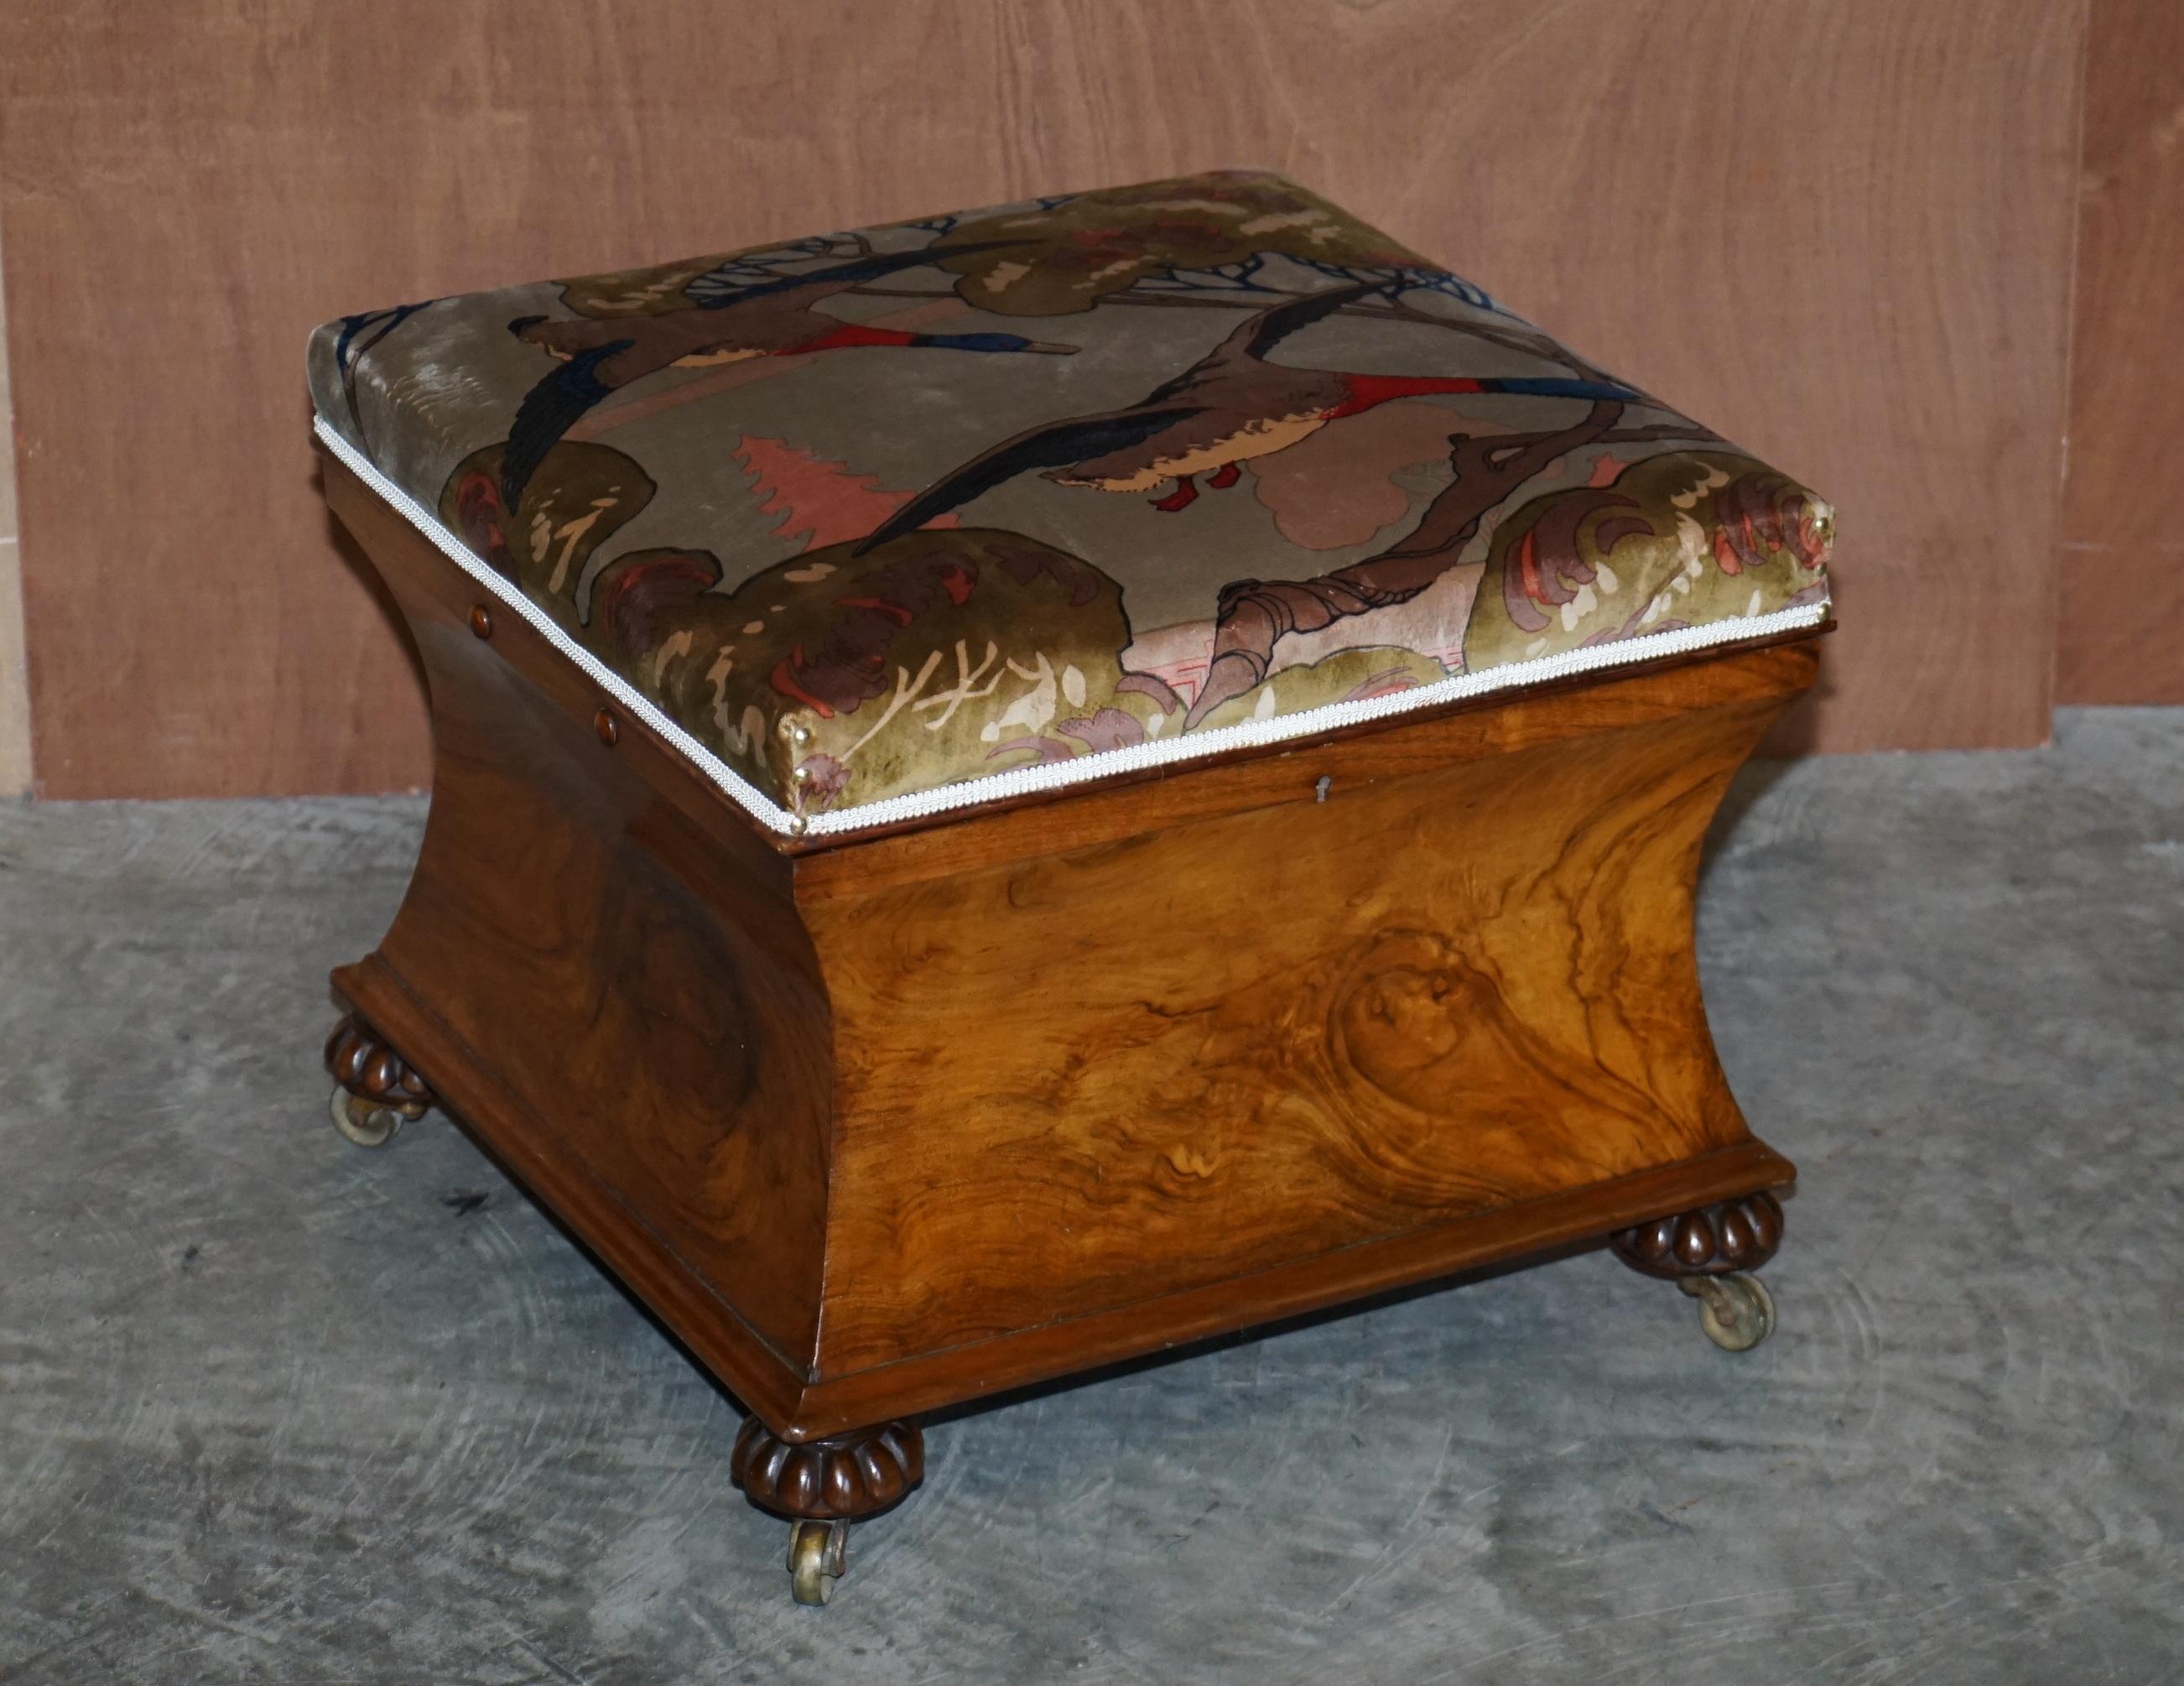 We are delighted to offer for sale this exquisite, fully restored William IV 1830 Burr & Burl Walnut ottoman footstool with Mulberry Flying Ducks silk velvet upholstery 

A well made and good looking traditional William IV Country House Ottoman.